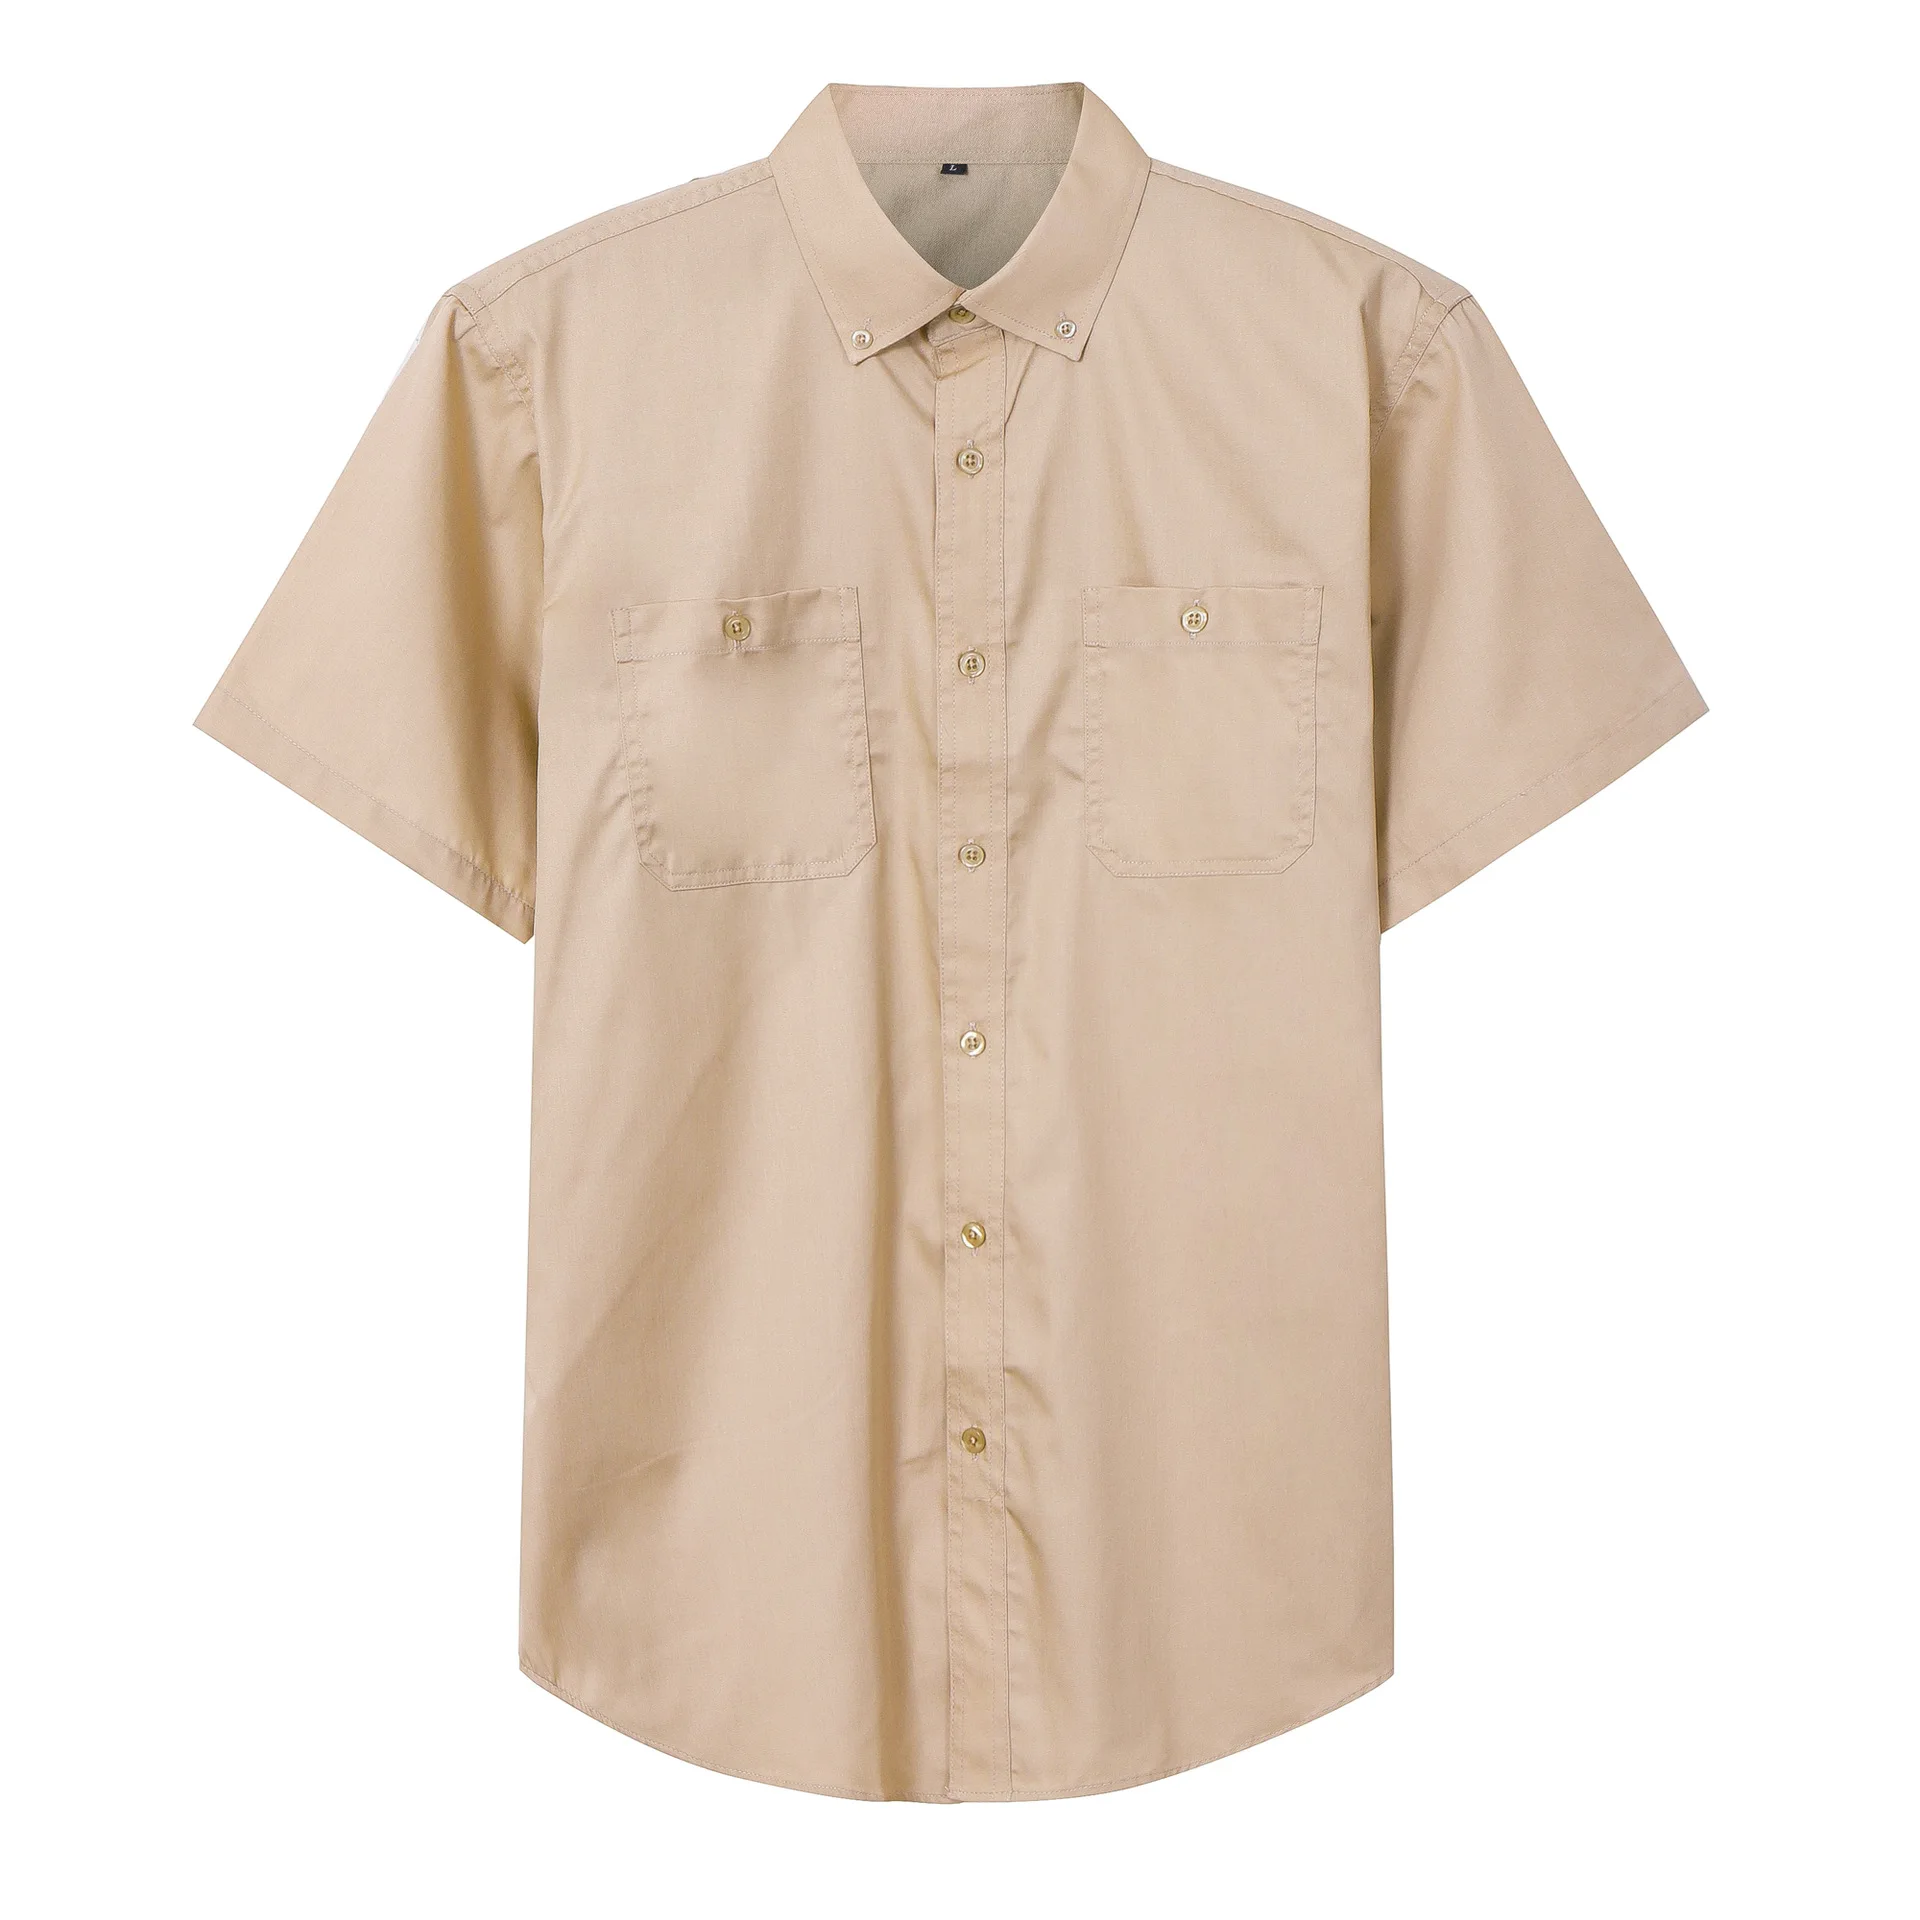 

The New Simple Solid-colored Workwear Japanese Loose-fitting Casual Lapel Men's Short-sleeved Shirt